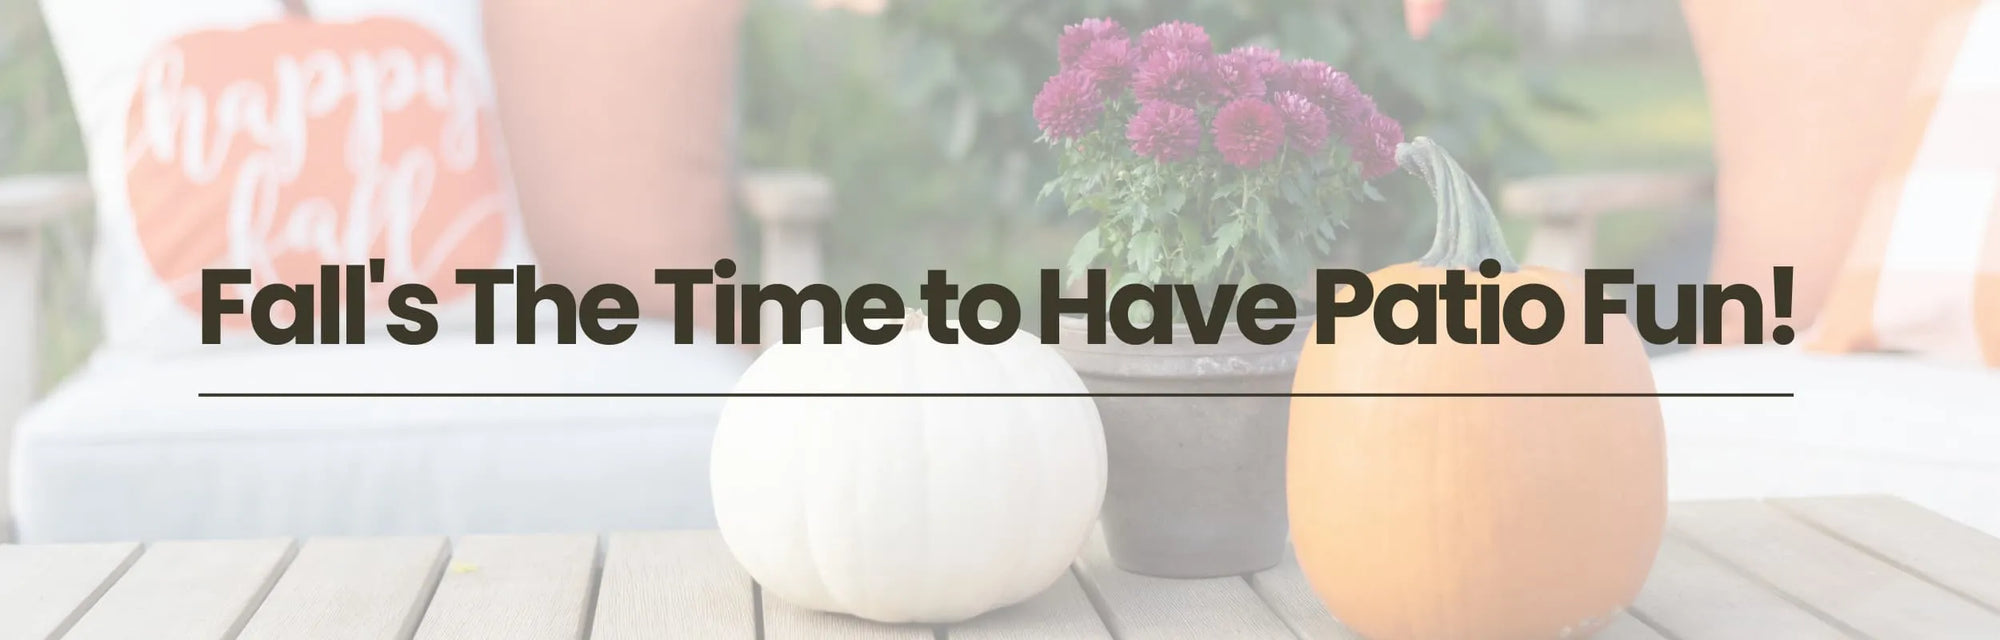 Fall's The Time to Have Patio Fun!